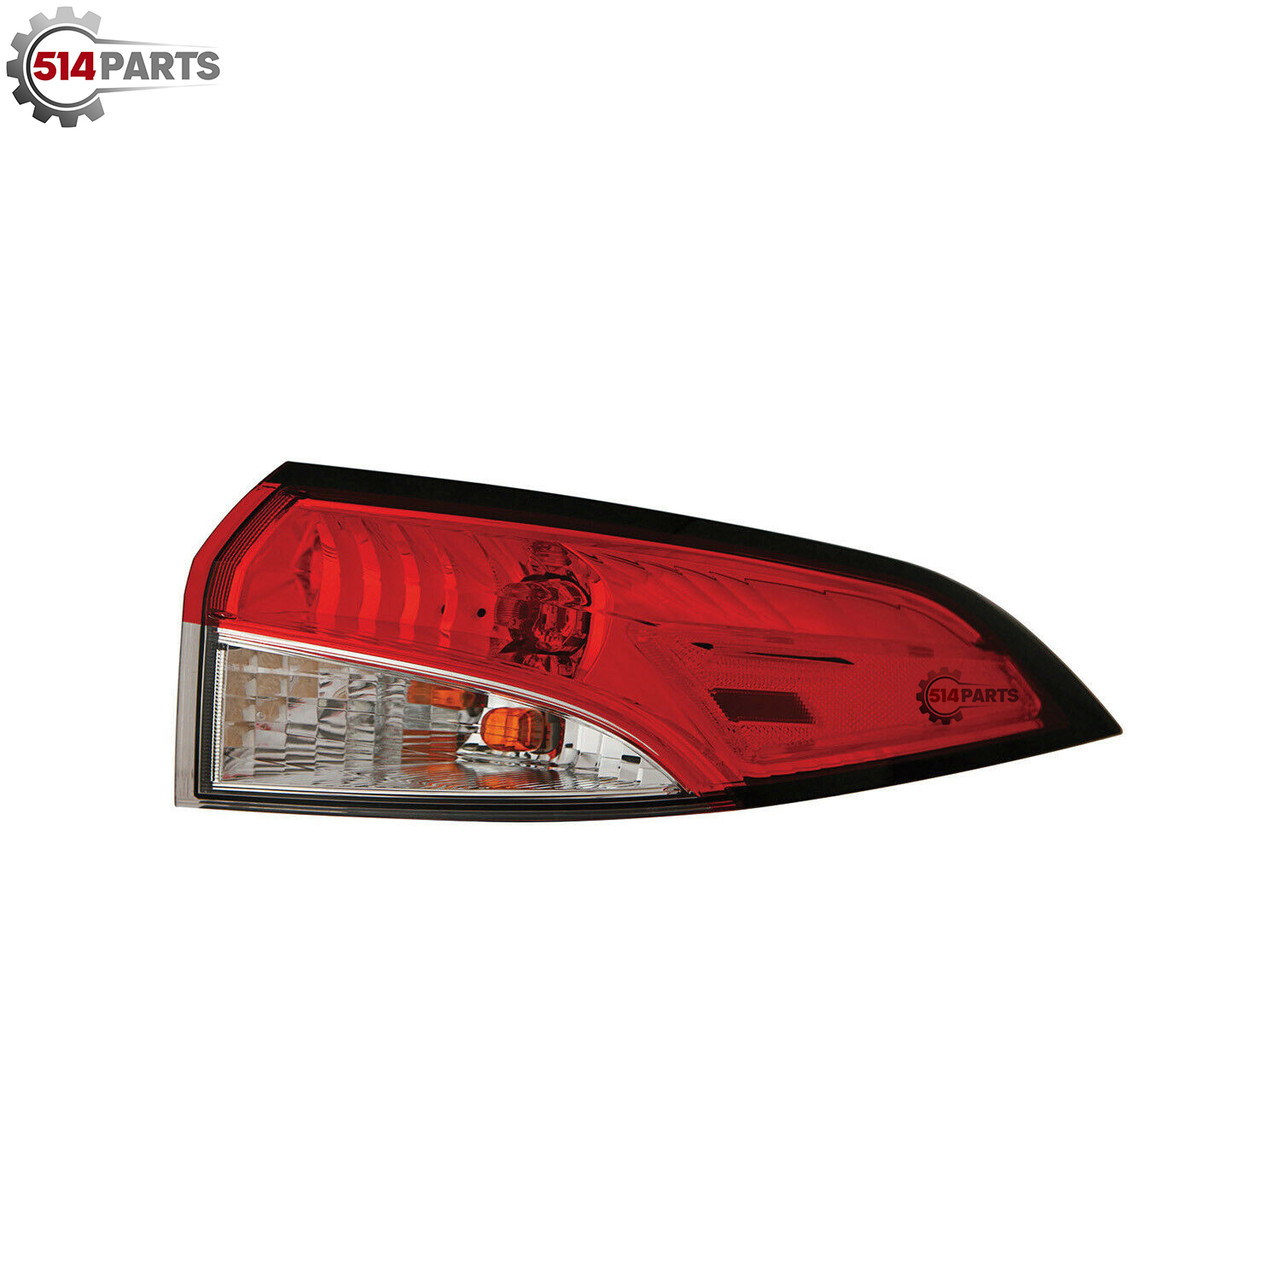 2020 - 2021 TOYOTA COROLLA SEDAN NORTH AMERICAN BUILT TAIL without SMOKED LENS LIGHTS High Quality - PHARES ARRIERE sans LENTILLE FUMEE Haute Qualite